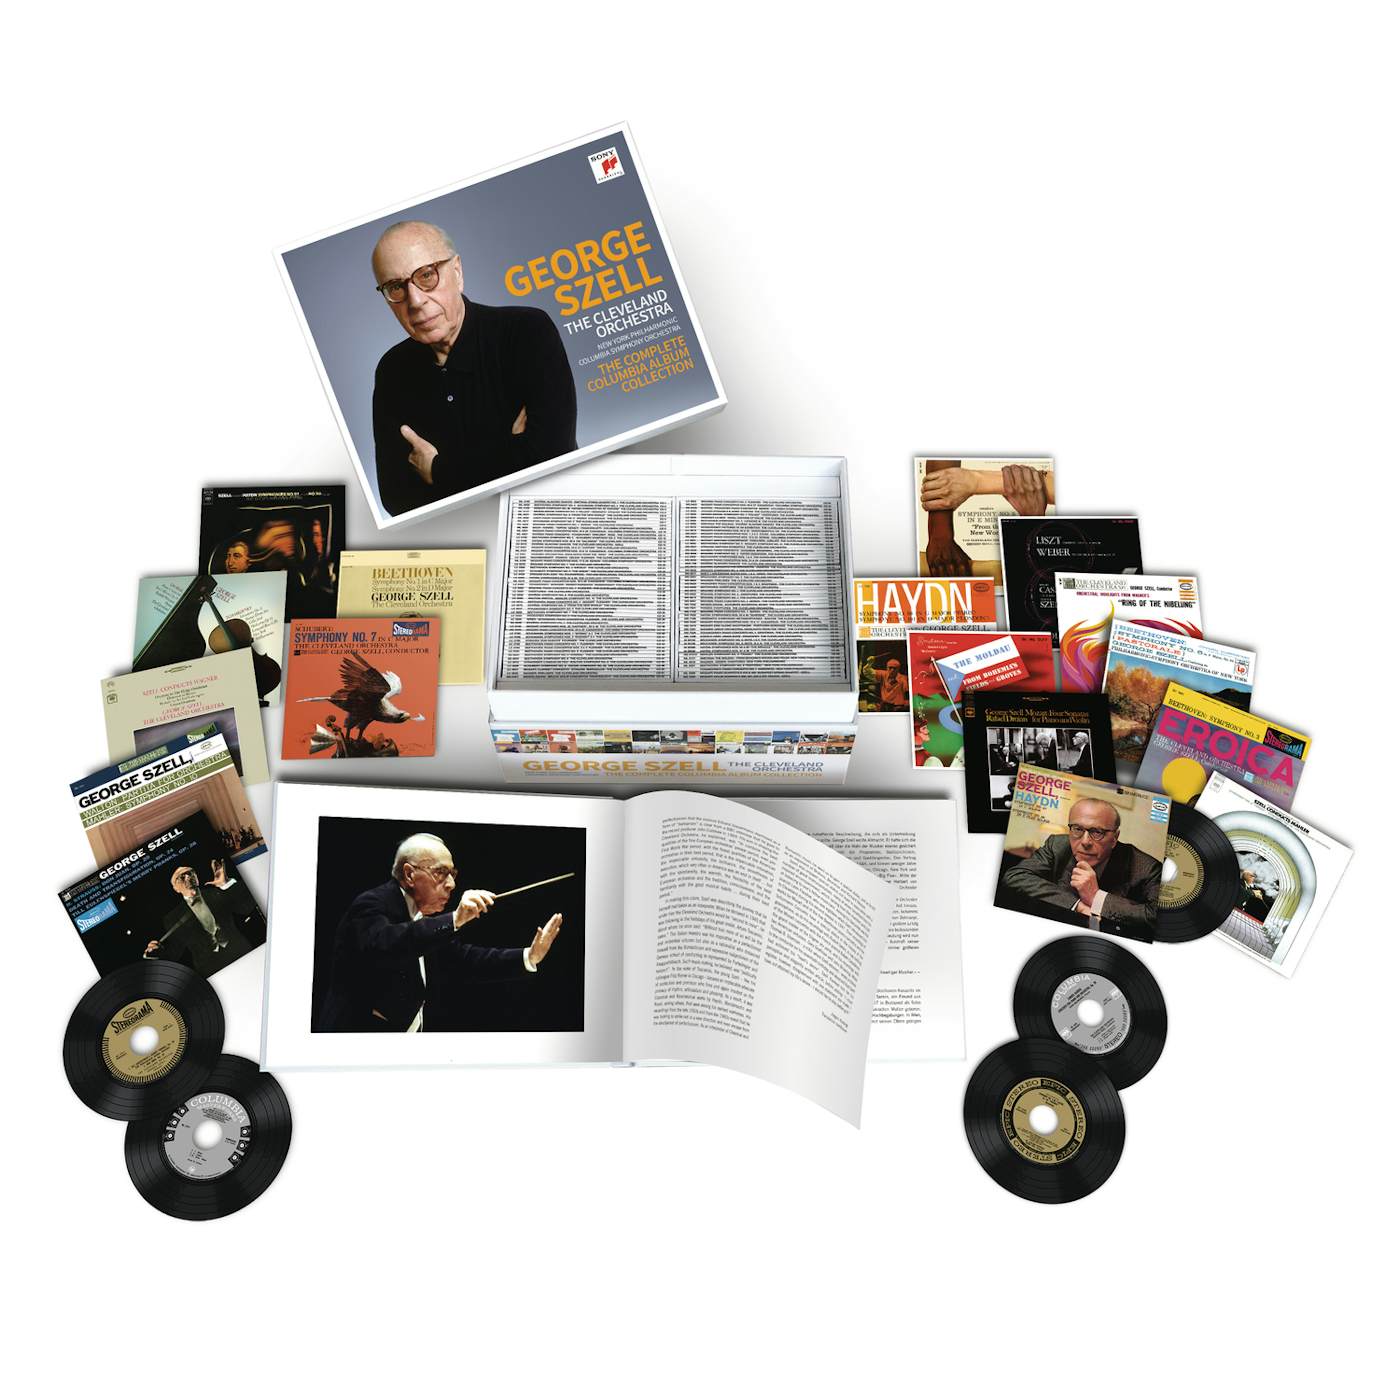 GEORGE SZELL - THE COMPLETE ALBUM COLLECTION CD